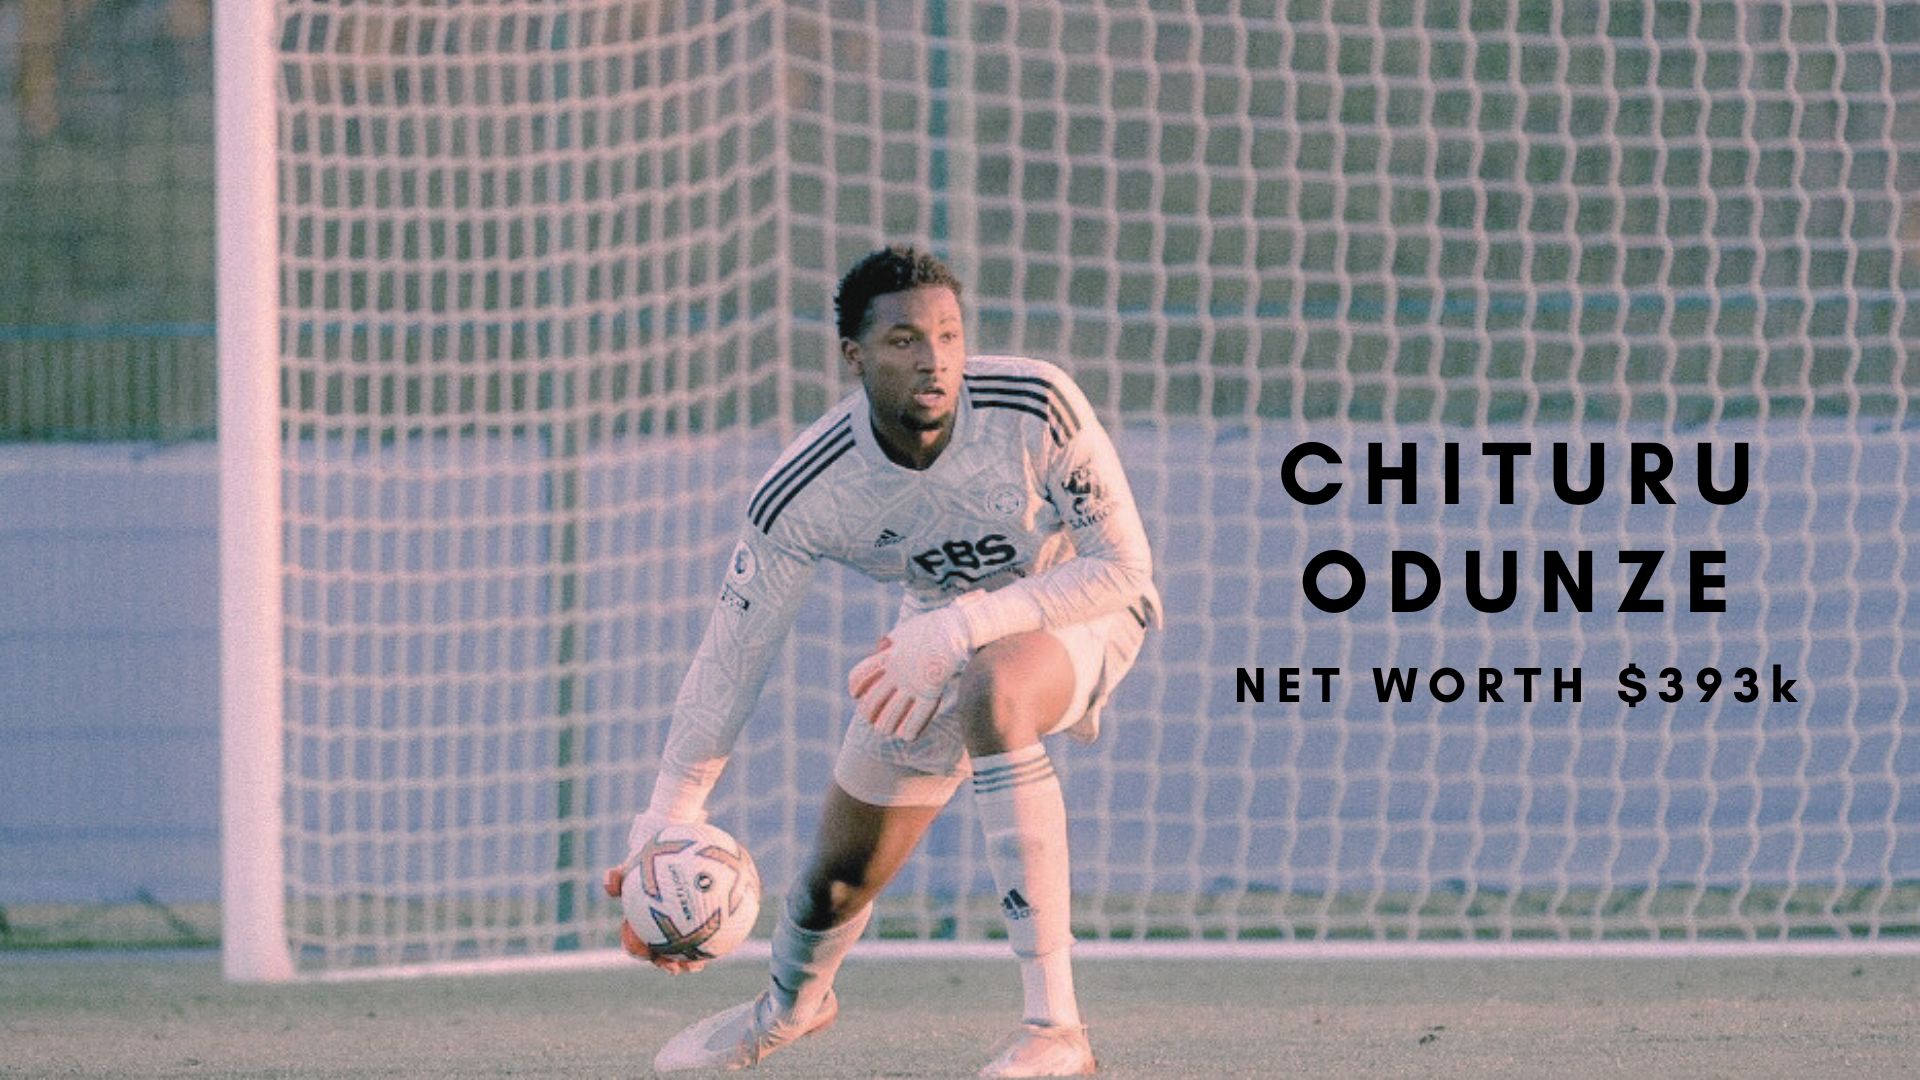 Chituru Odunze net worth, contract, salary and more 2023.